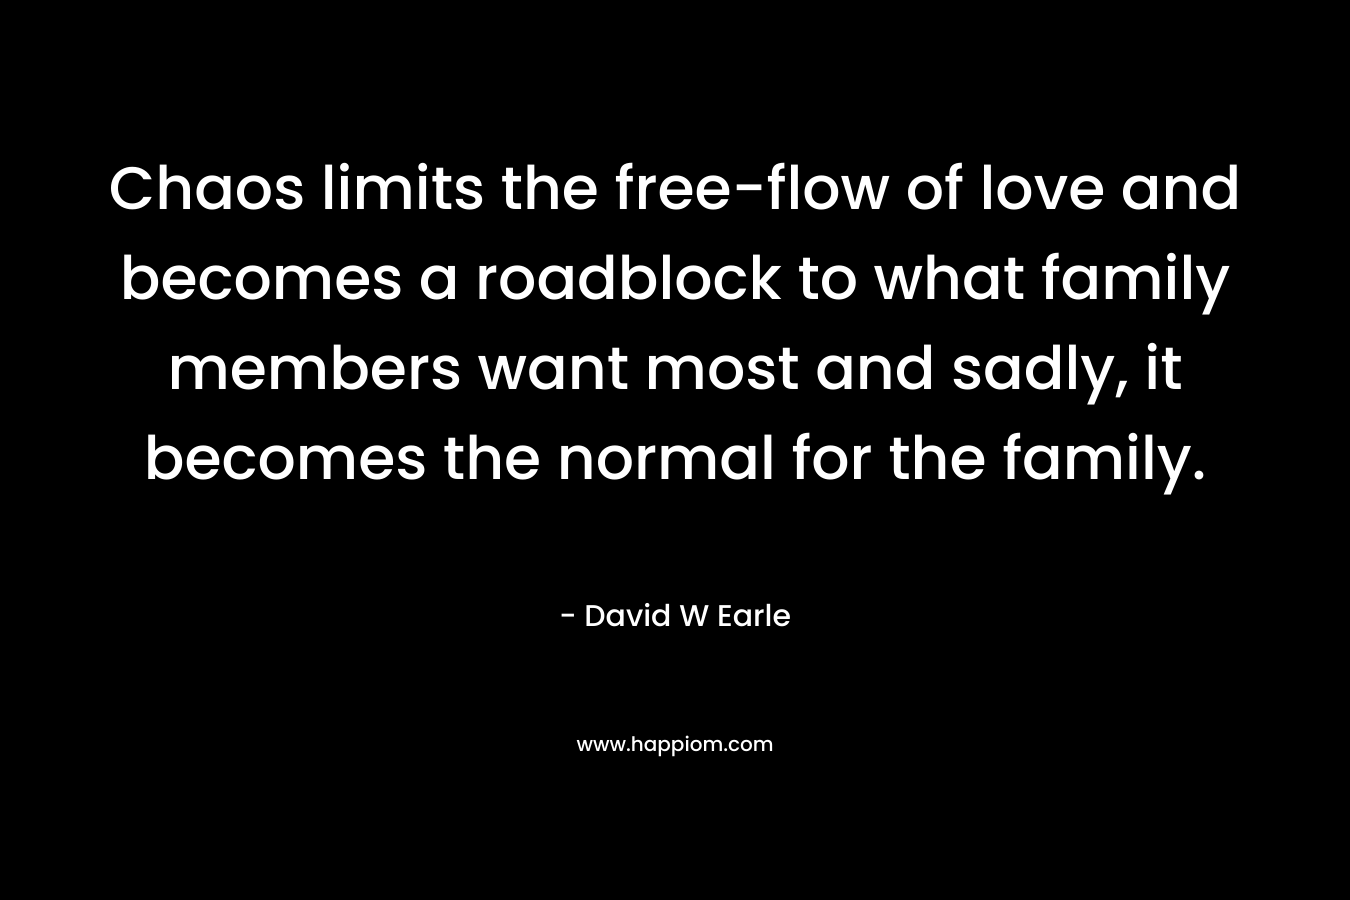 Chaos limits the free-flow of love and becomes a roadblock to what family members want most and sadly, it becomes the normal for the family.